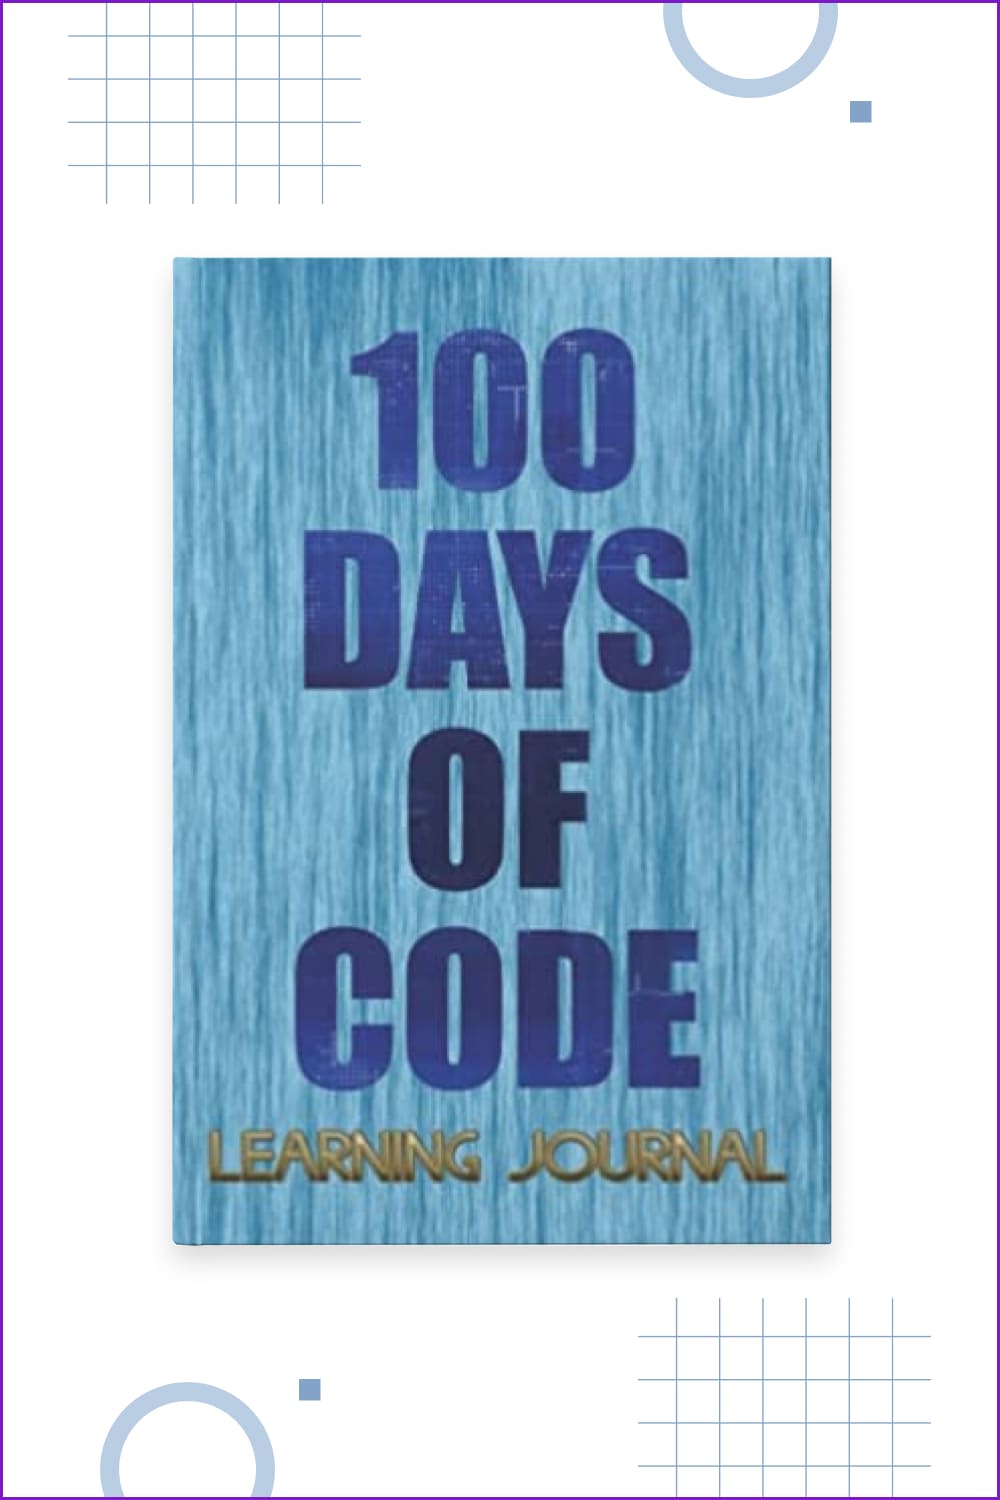 A book '100 Days of Code Learning Journal'.